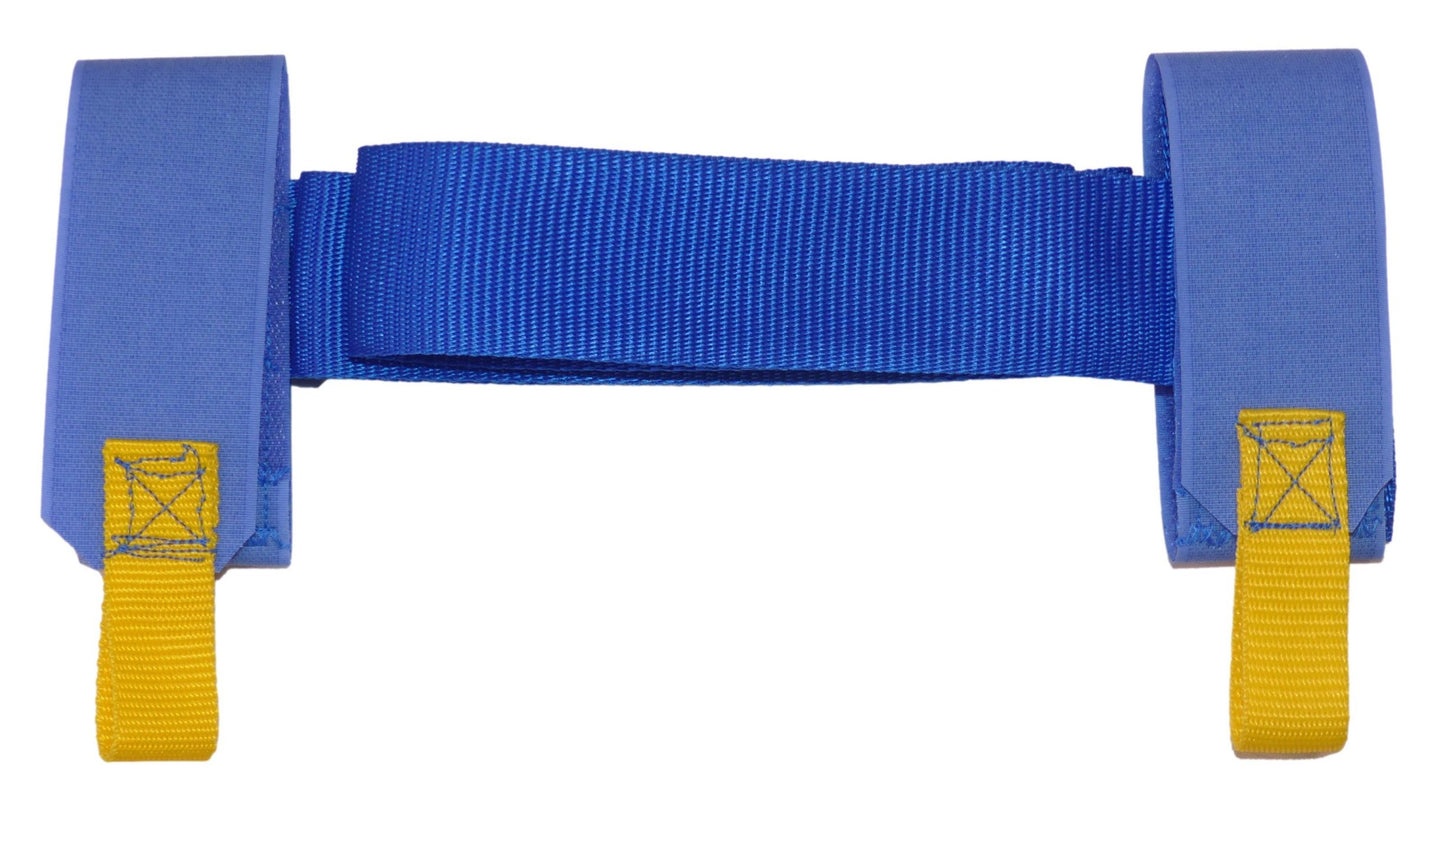 Benristraps Ski and Pole Carry Strap in blue